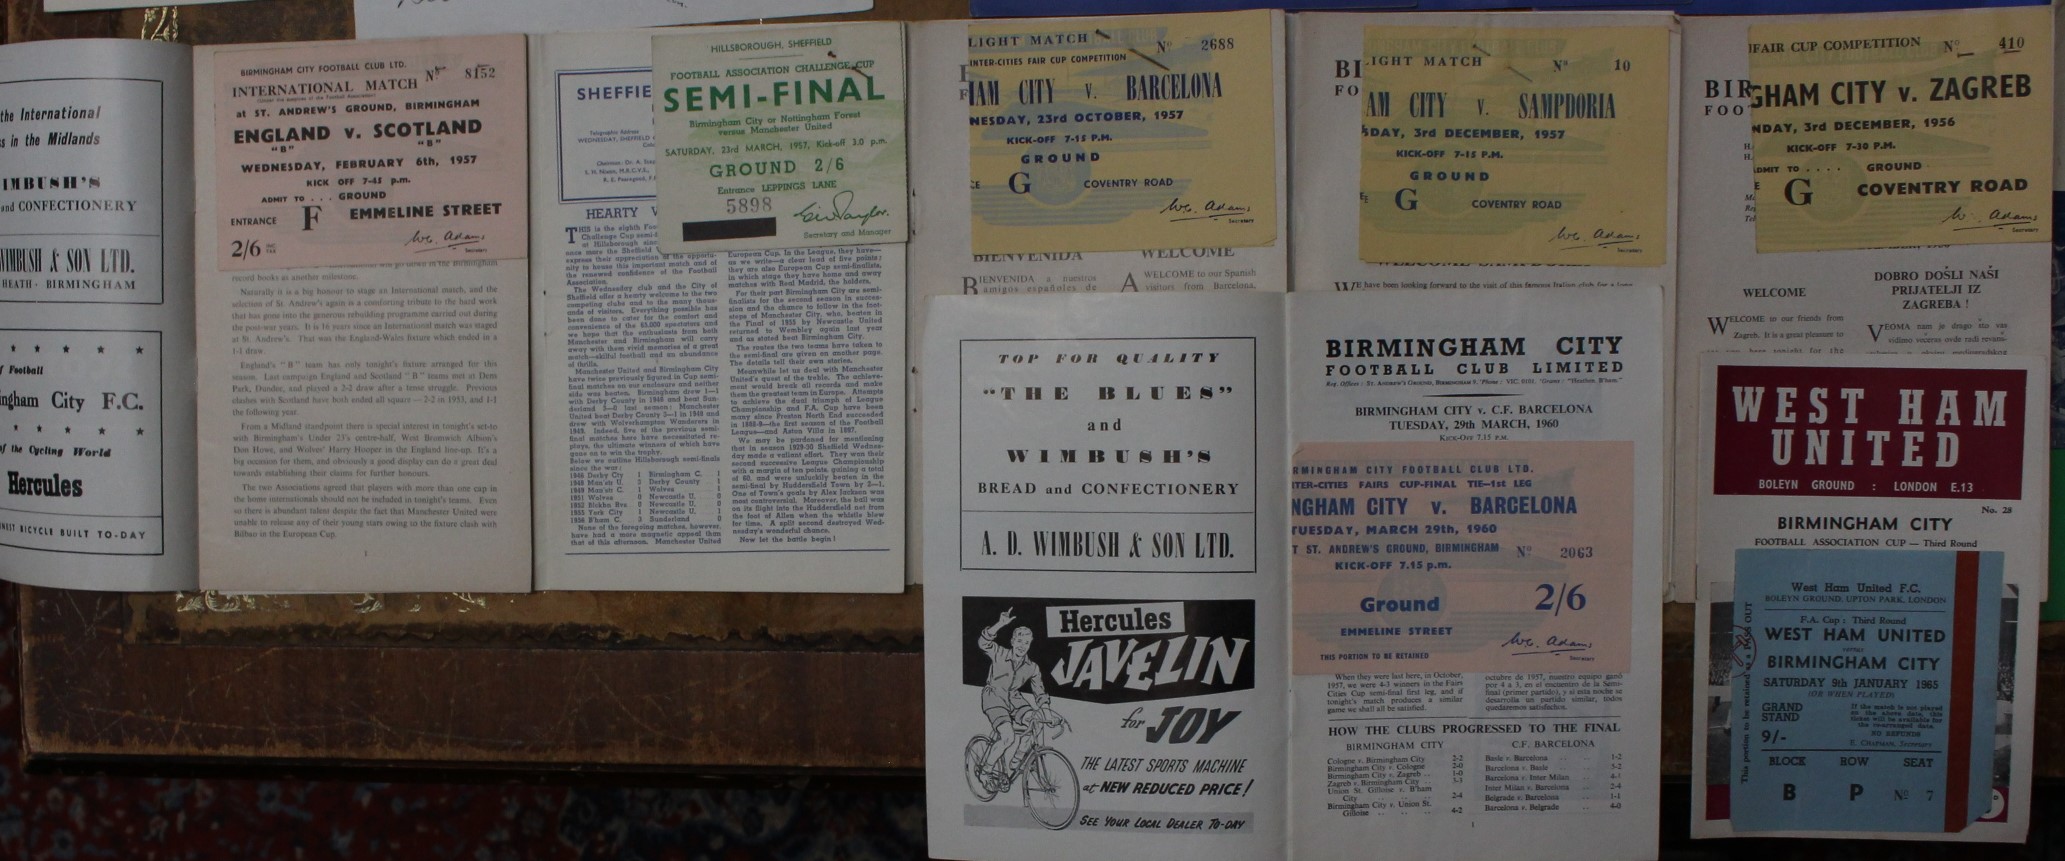 Football: A collection of assorted Birmingham City home and away football programmes dating from the - Image 3 of 4